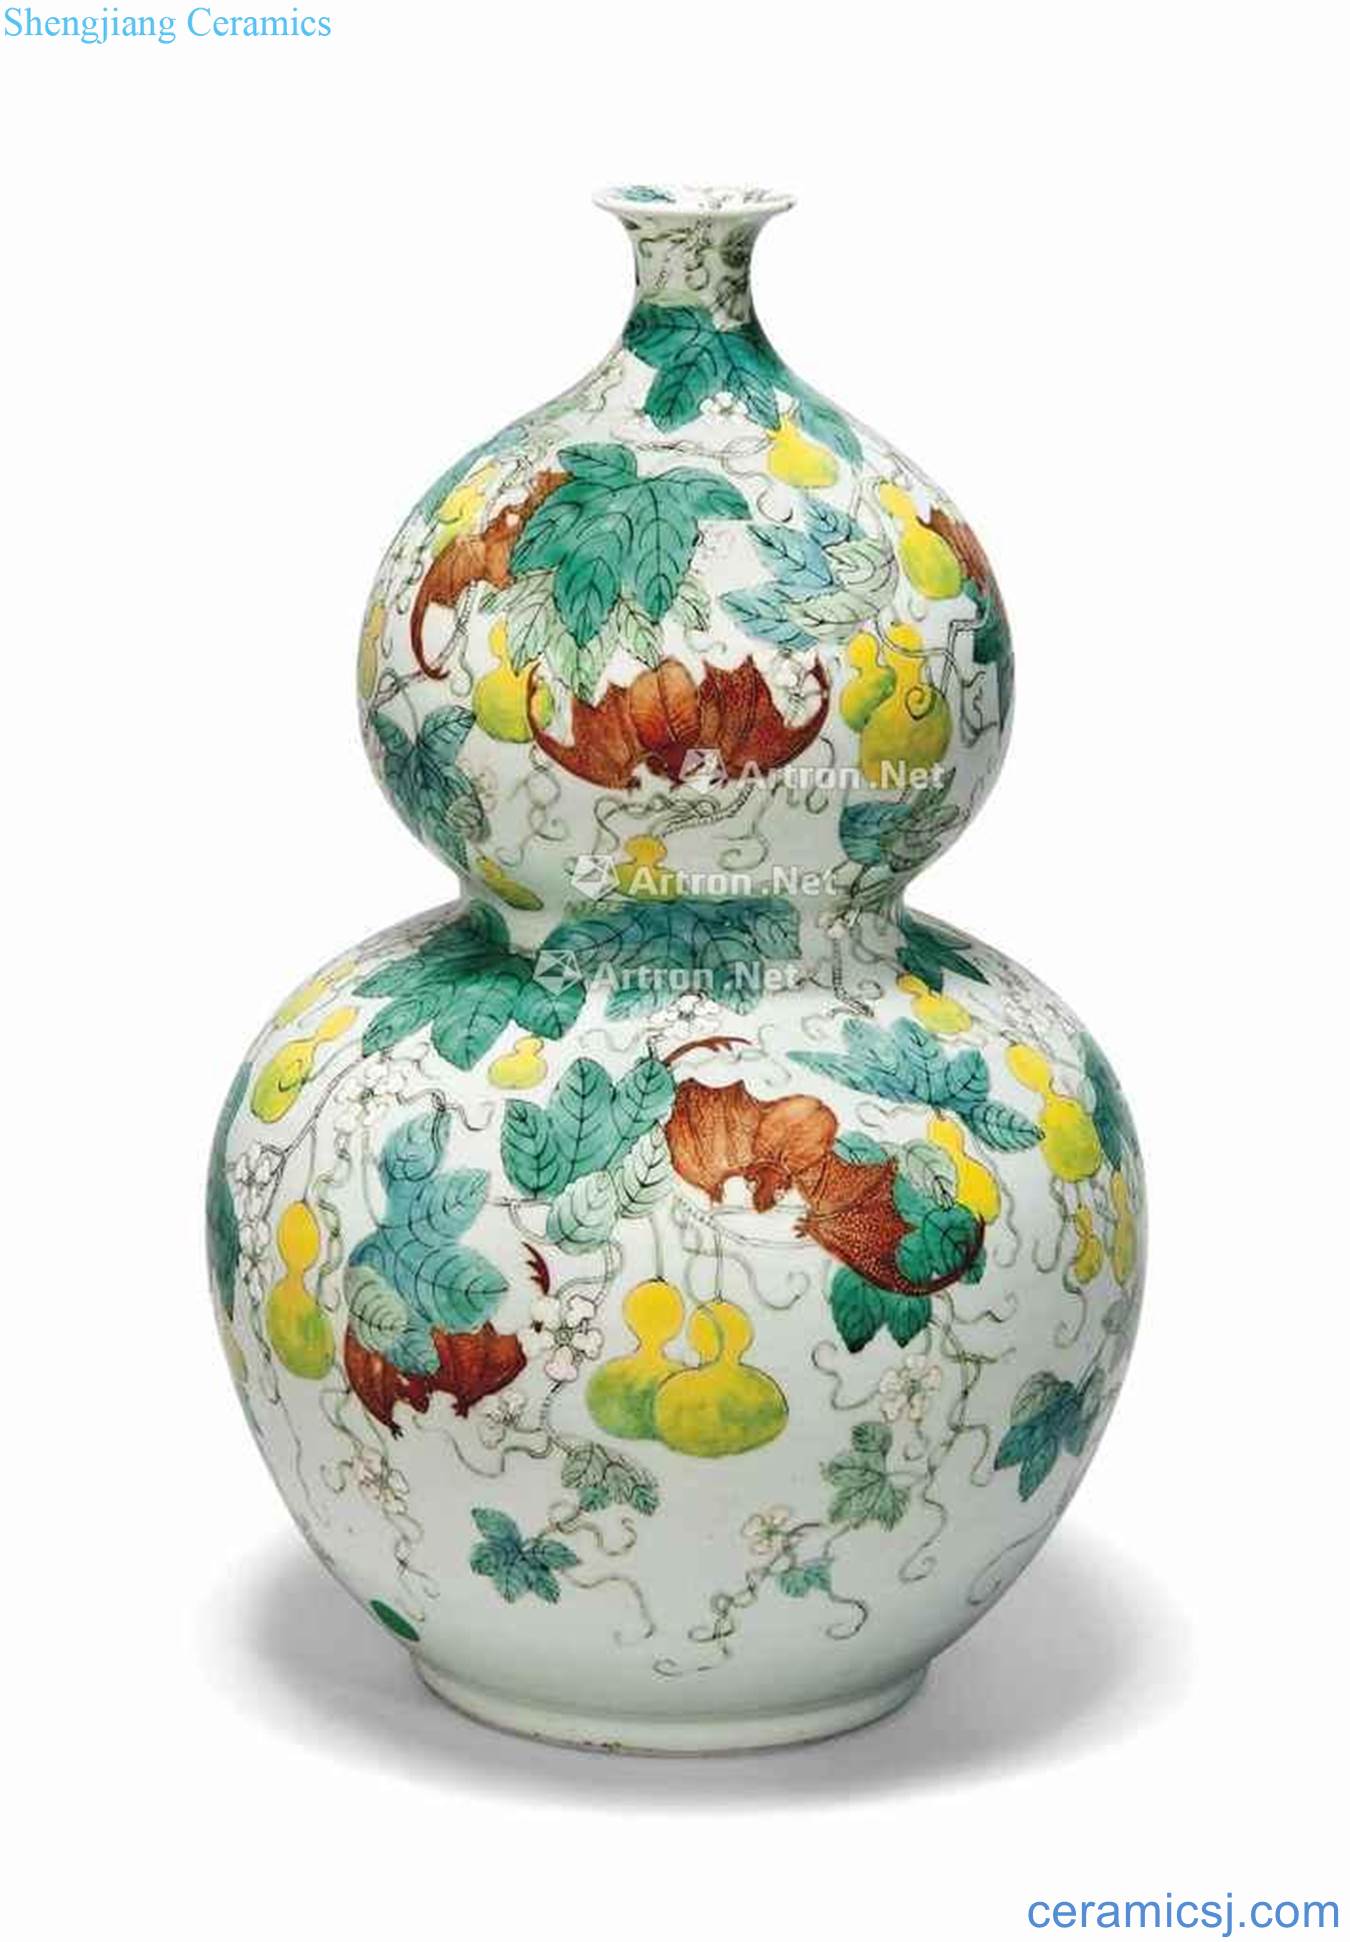 In the 19th century pastel gourd bottle